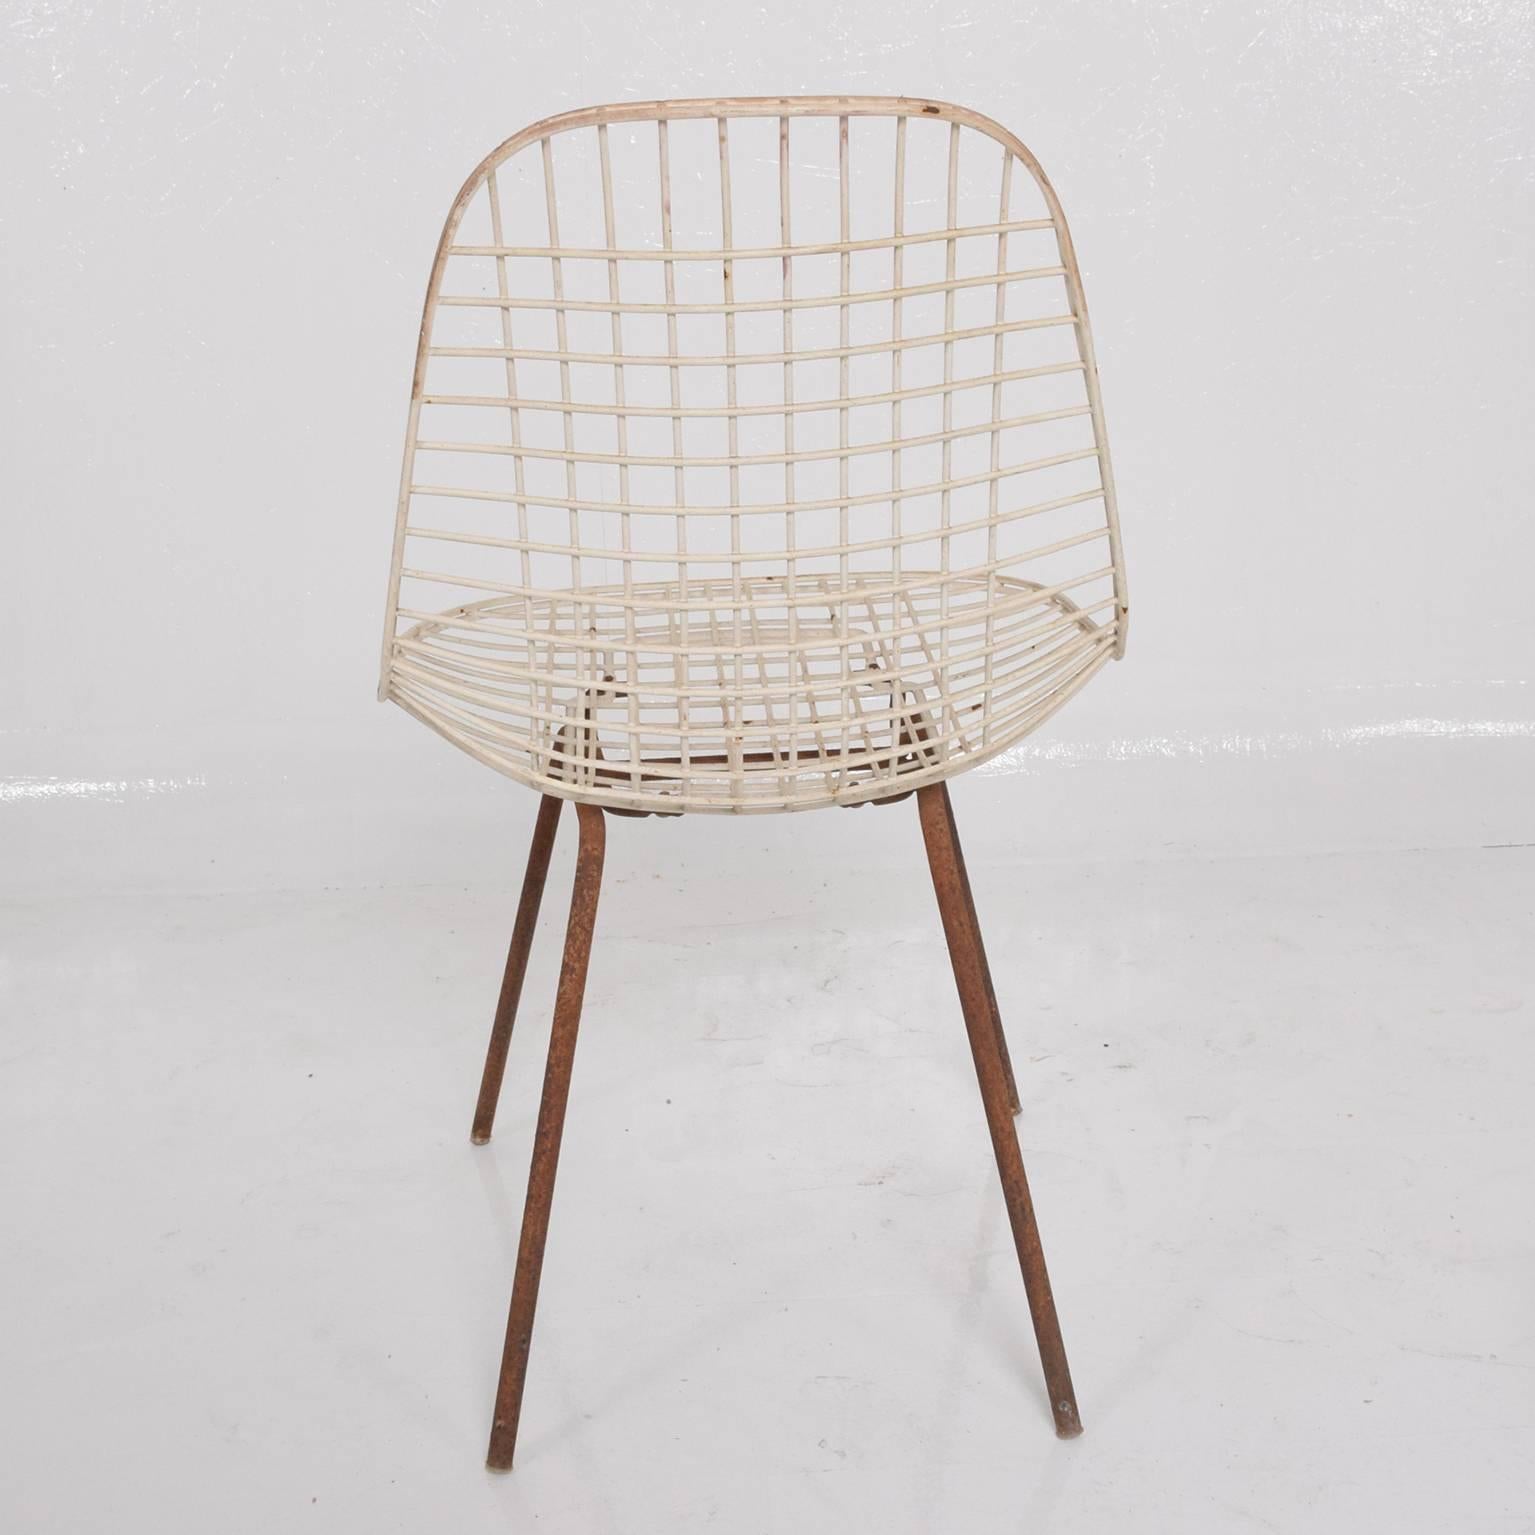 Mid-Century Modern Set of Three Wire Chair DKX 5 by Ray & Charles Eames Designed in 1951